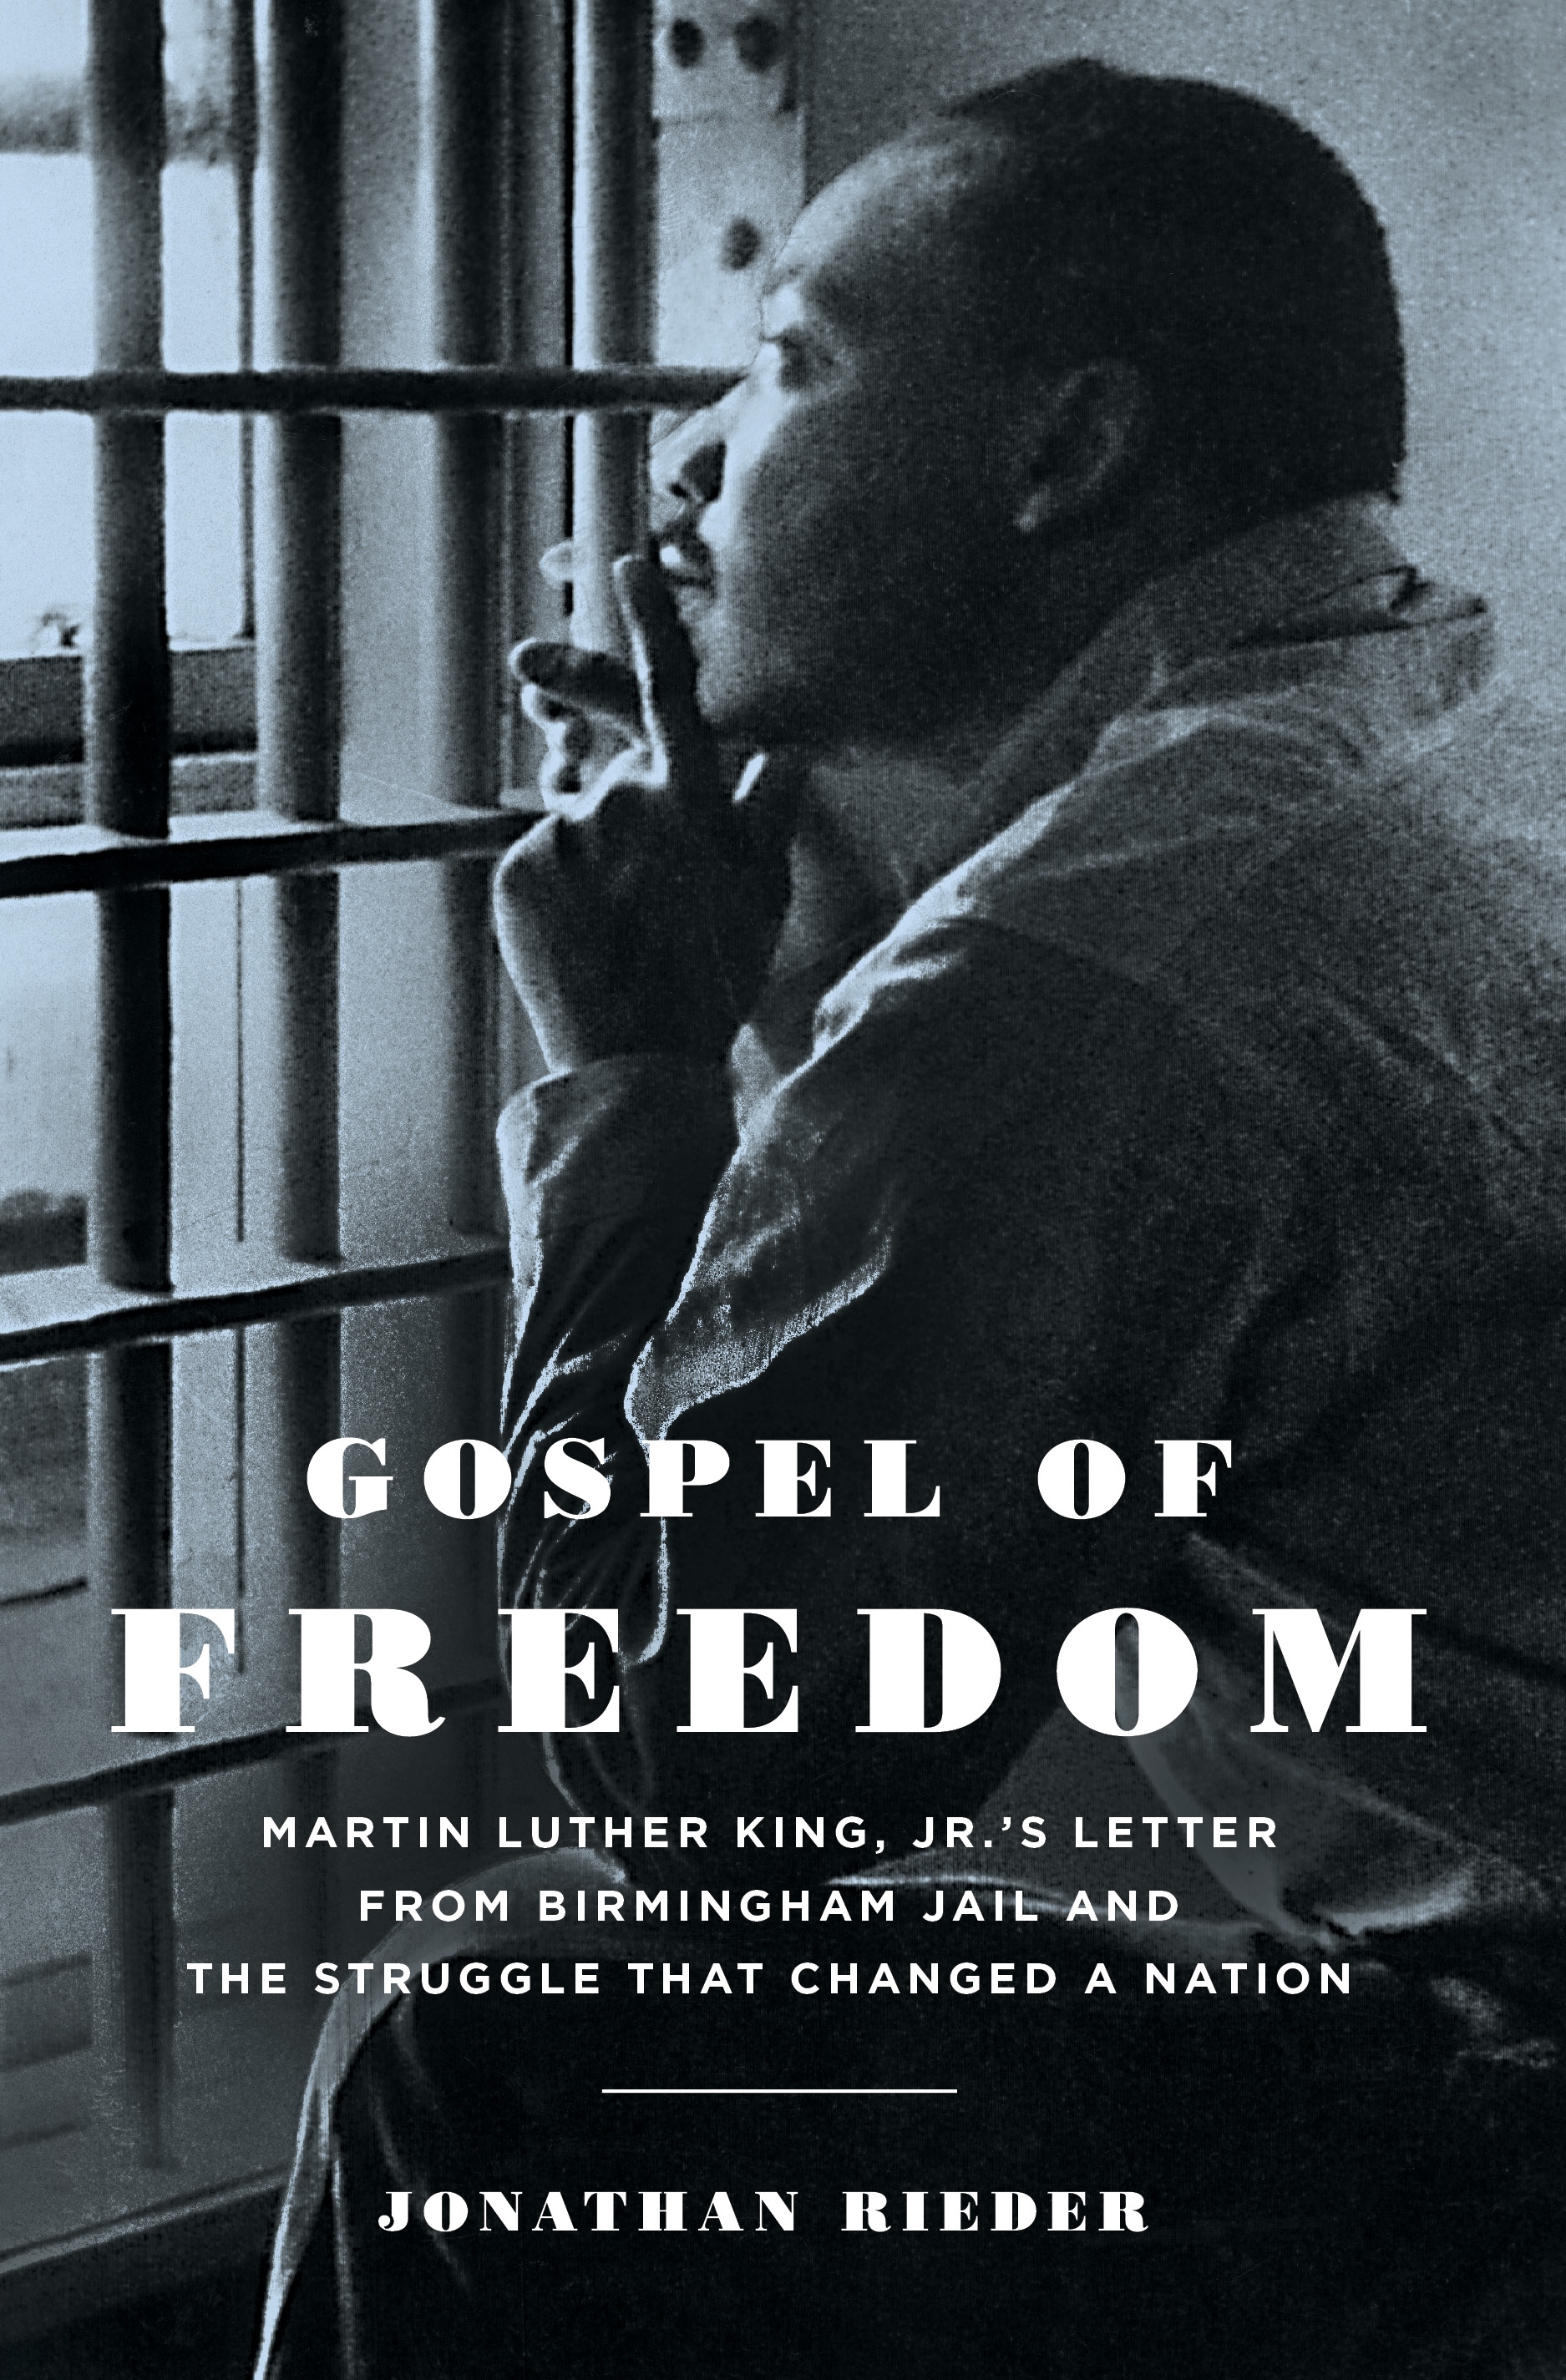 Book cover reads: Gospel of freedom.  Martin Luther Kin, Jr.'s letter from birmingham jail and the struggle that changed a nation.  Jonathan Rieder